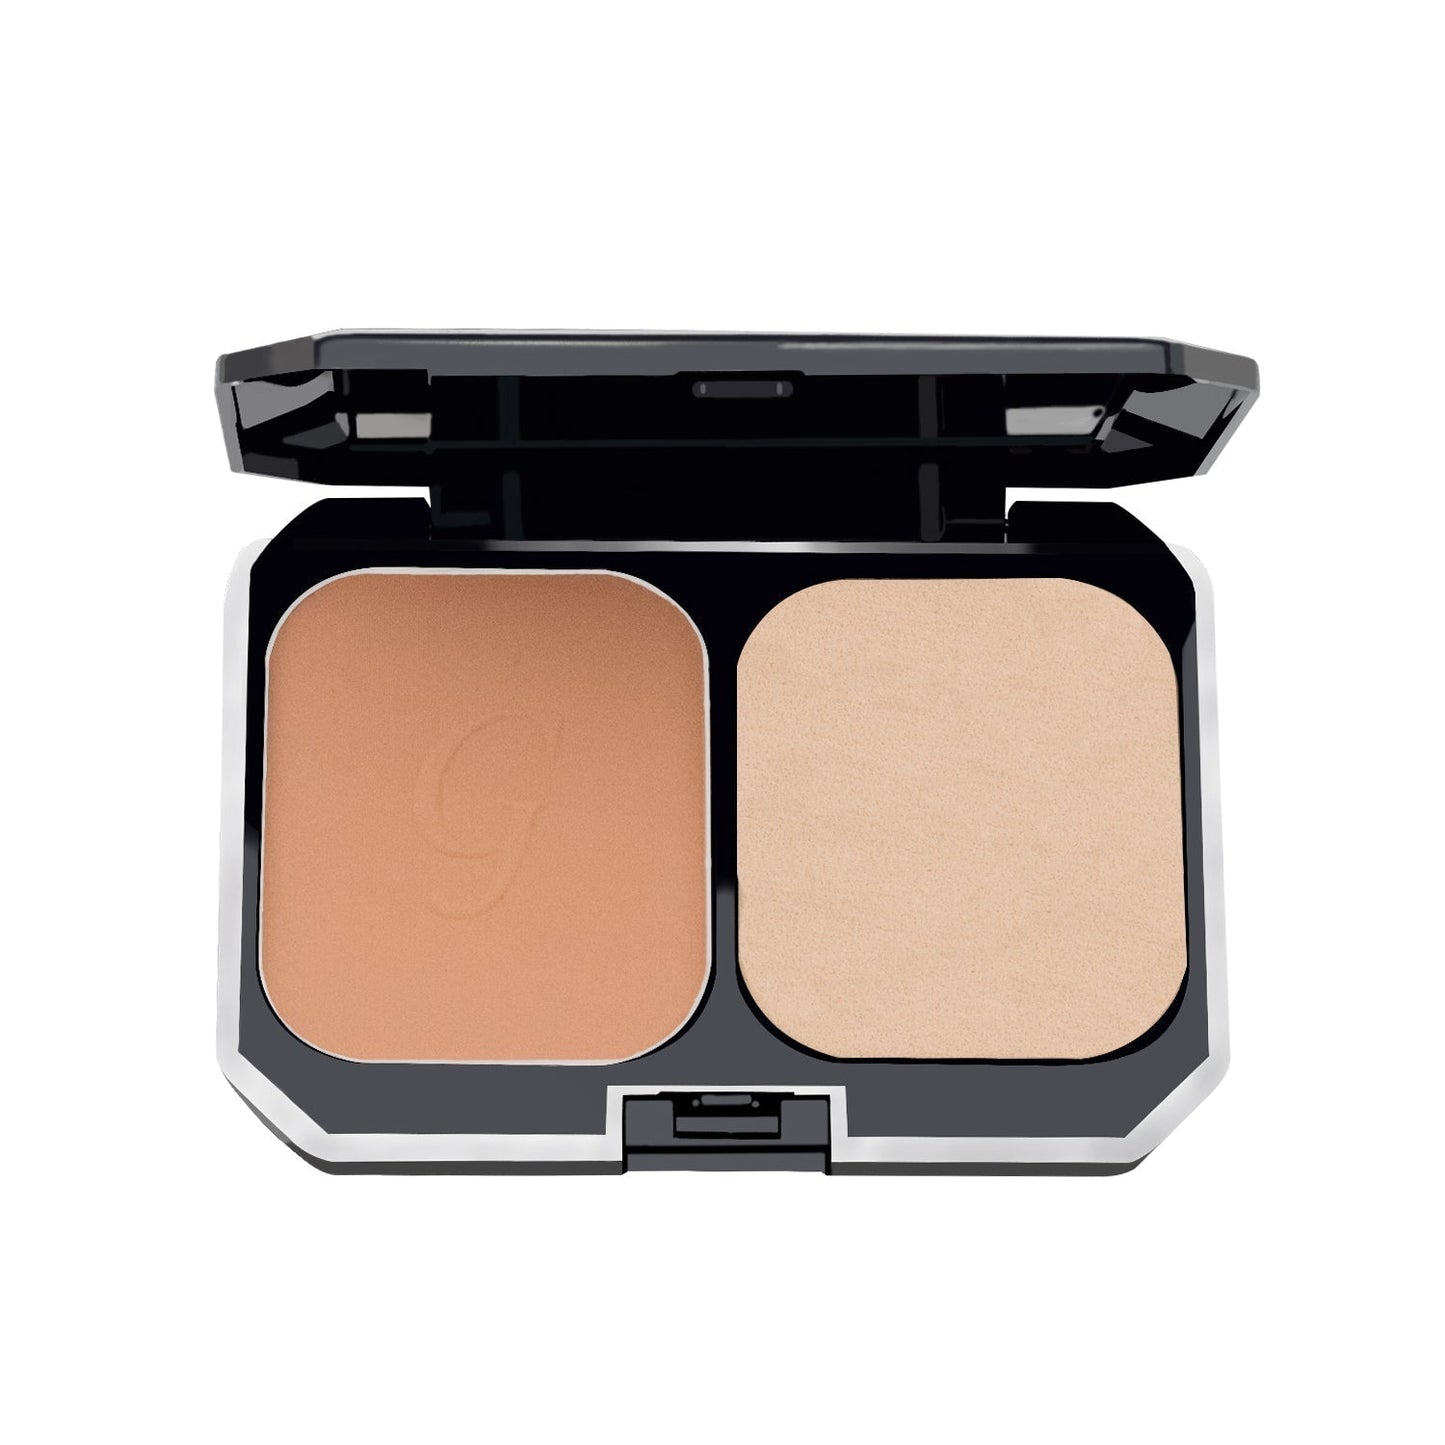 Glamgals Hollywood-U.S.A 2 In 1 Two Way Cake Compact Makeup + Foundation SPF 15, (Sandy Brown) - BUDNE